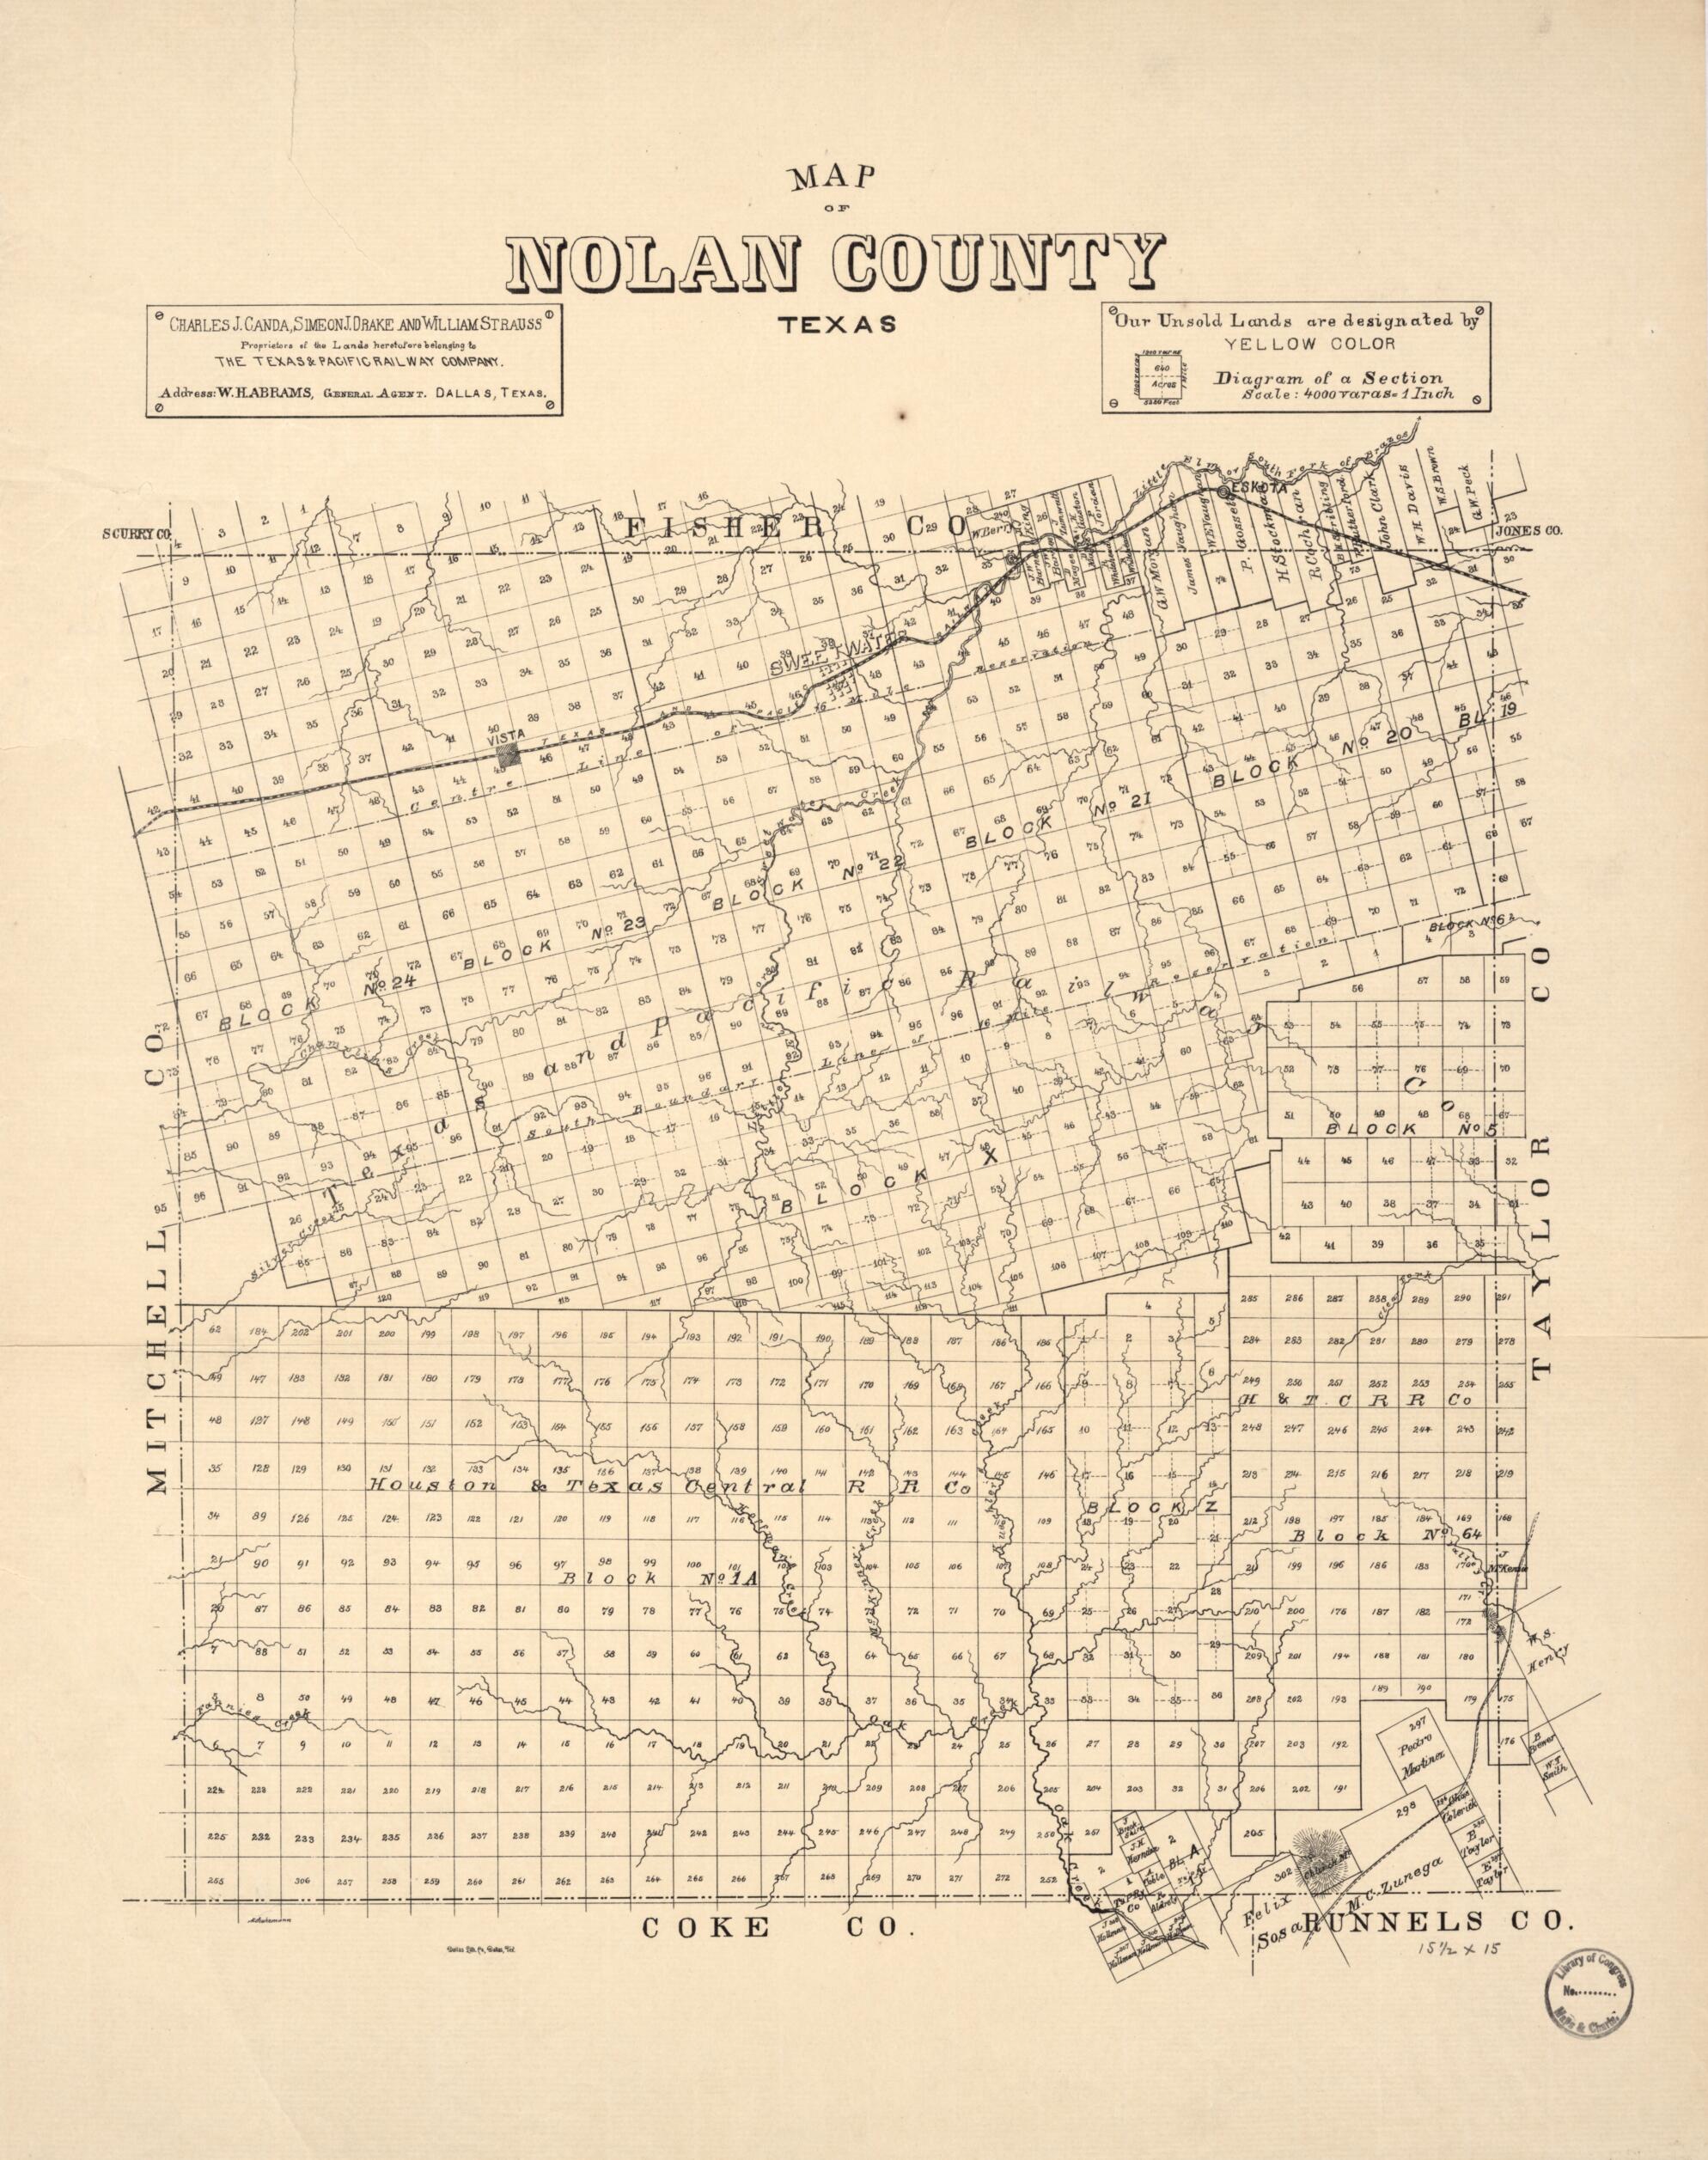 This old map of Map of Nolan County, Texas from 1890 was created by M. Stakemann in 1890